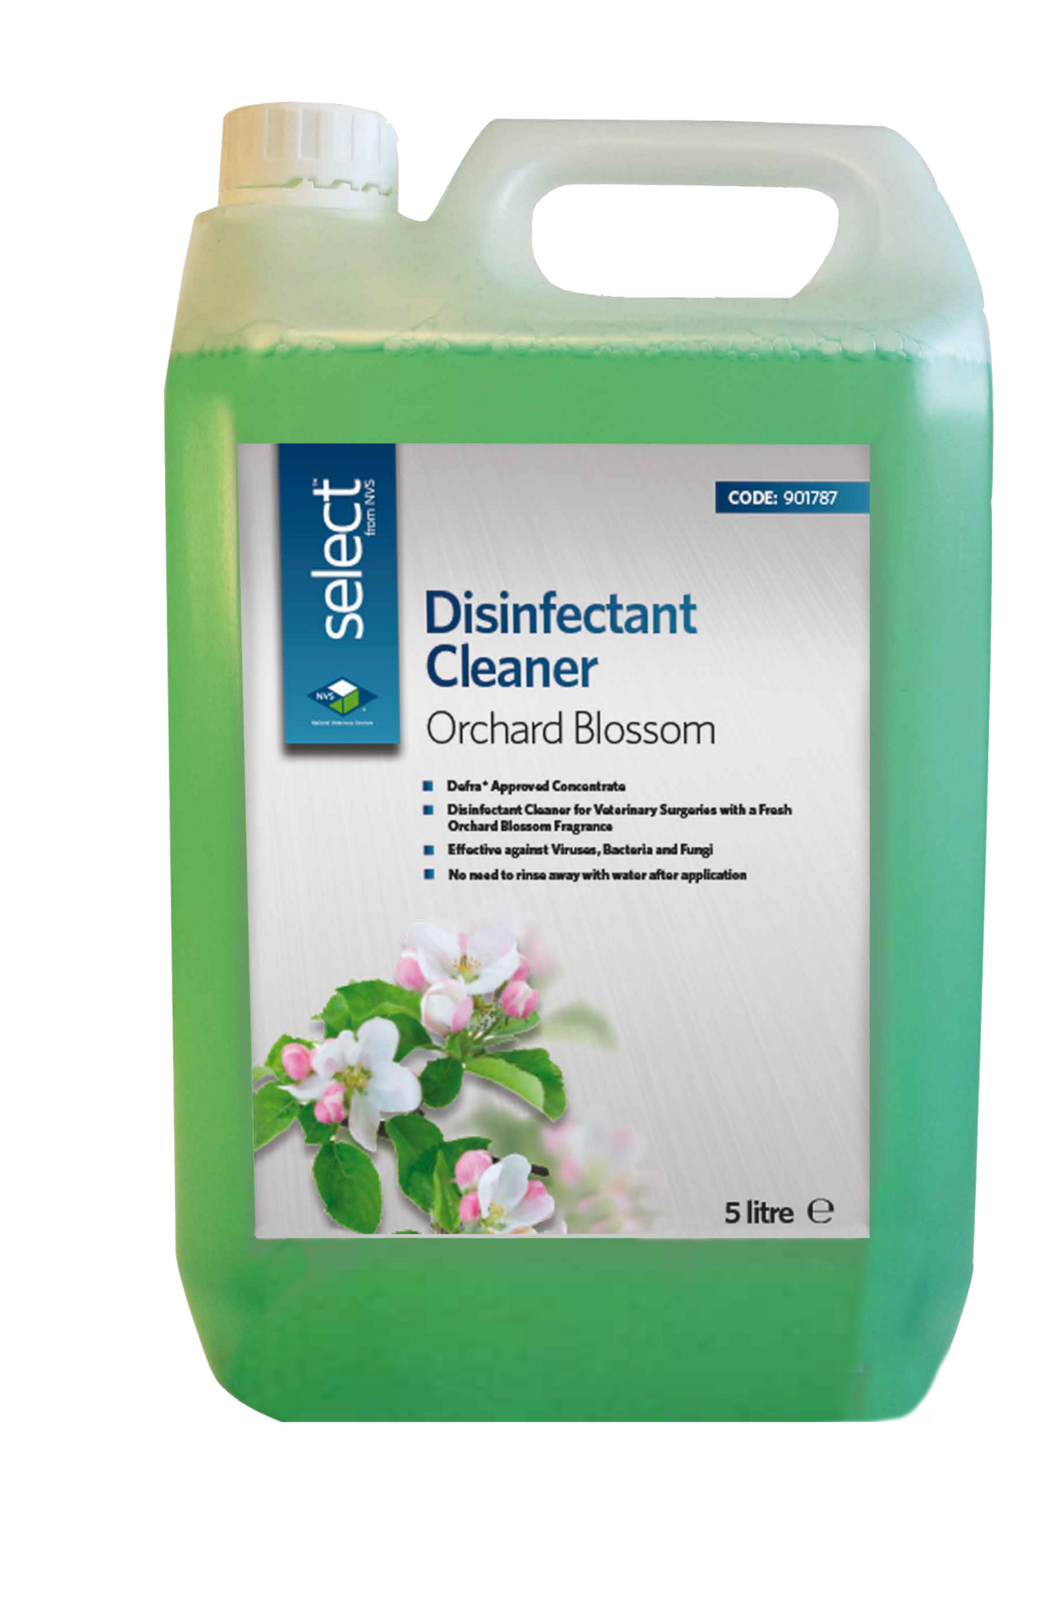 Disinfectant Defra Orchard Blossom – Select